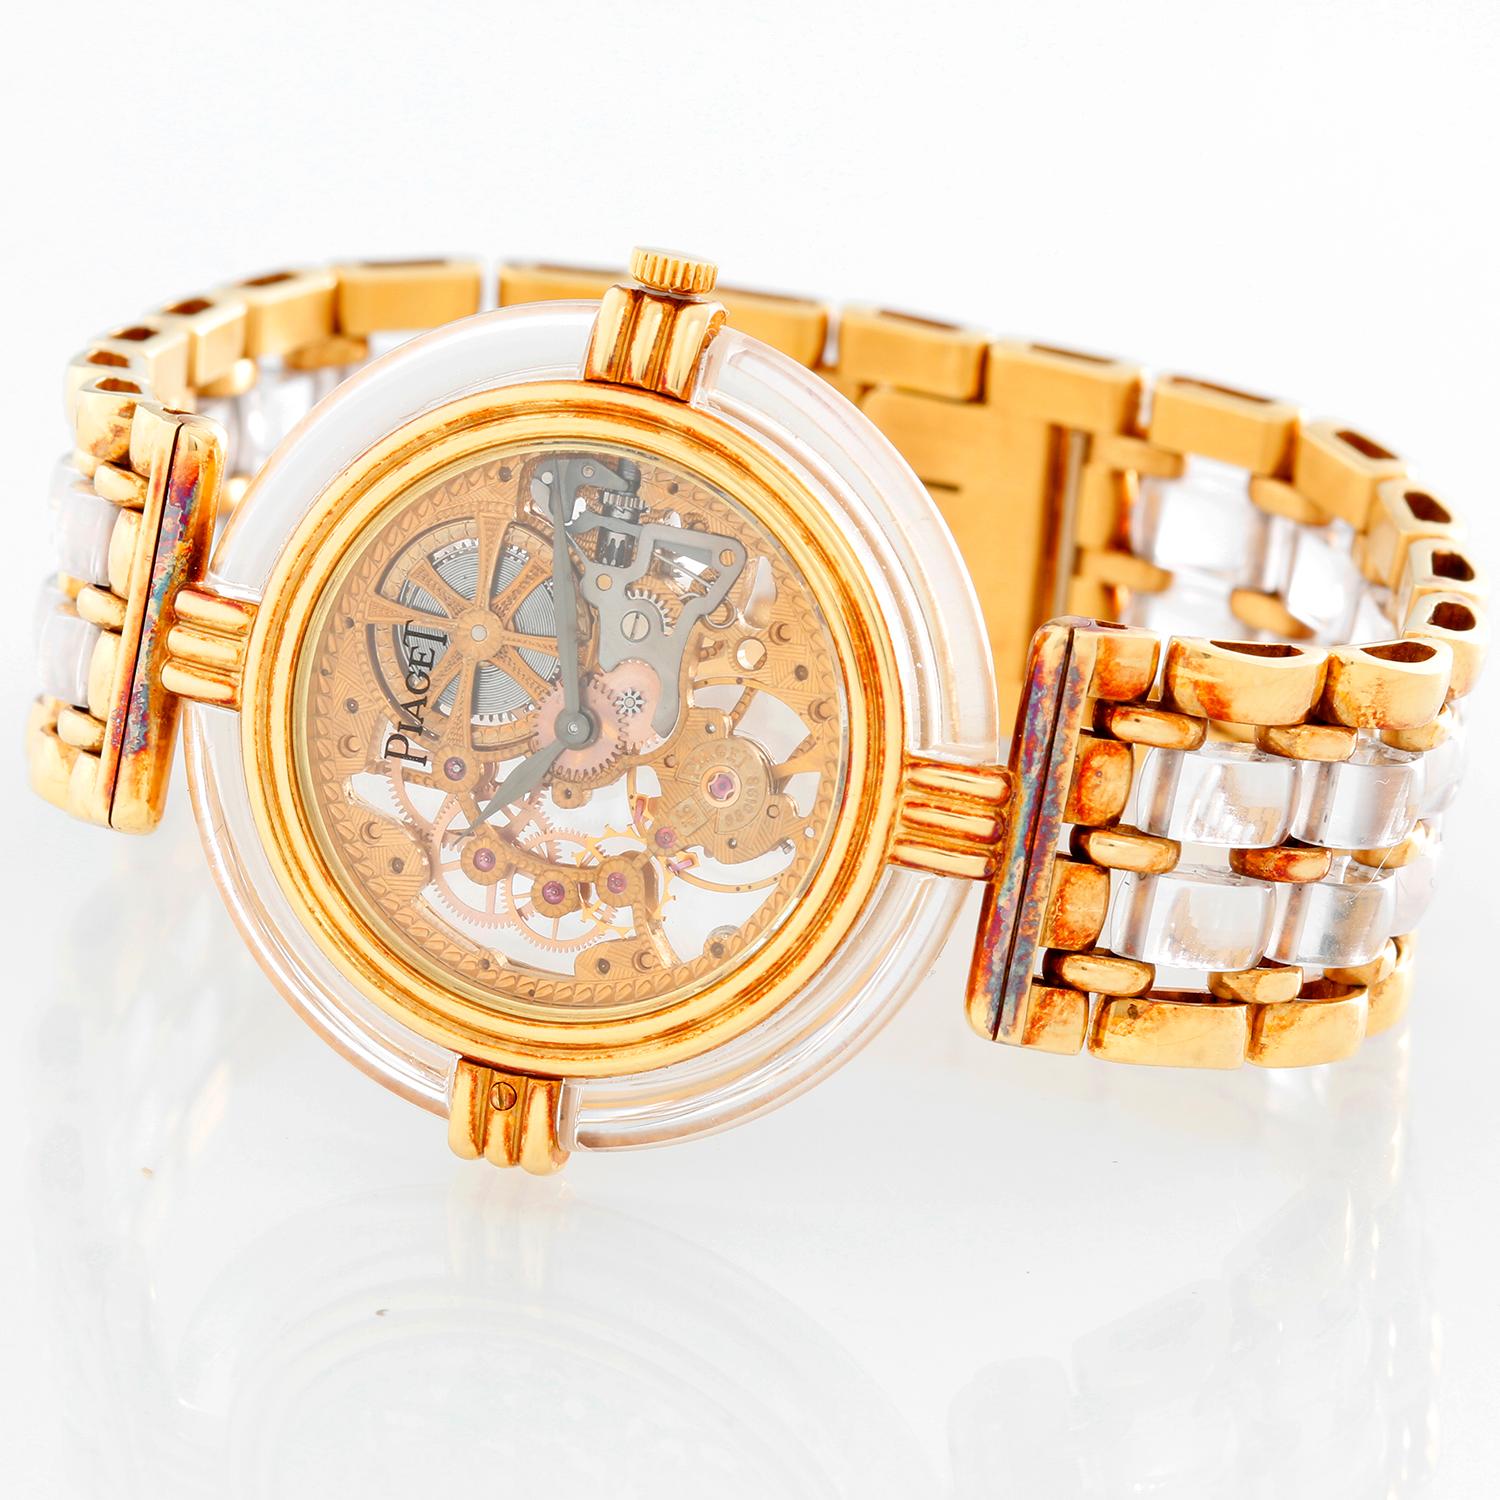 Piaget 18K  Yellow Gold Skeleton  Watch - Manual. 18K Yellow gold and rock crystal ( 32 mm ). Skeleton dial with smooth rock crystal bezel. 18K Yellow gold and rock crystal Piaget integral link bracelet and 18K yellow gold clasp. Pre-owned with